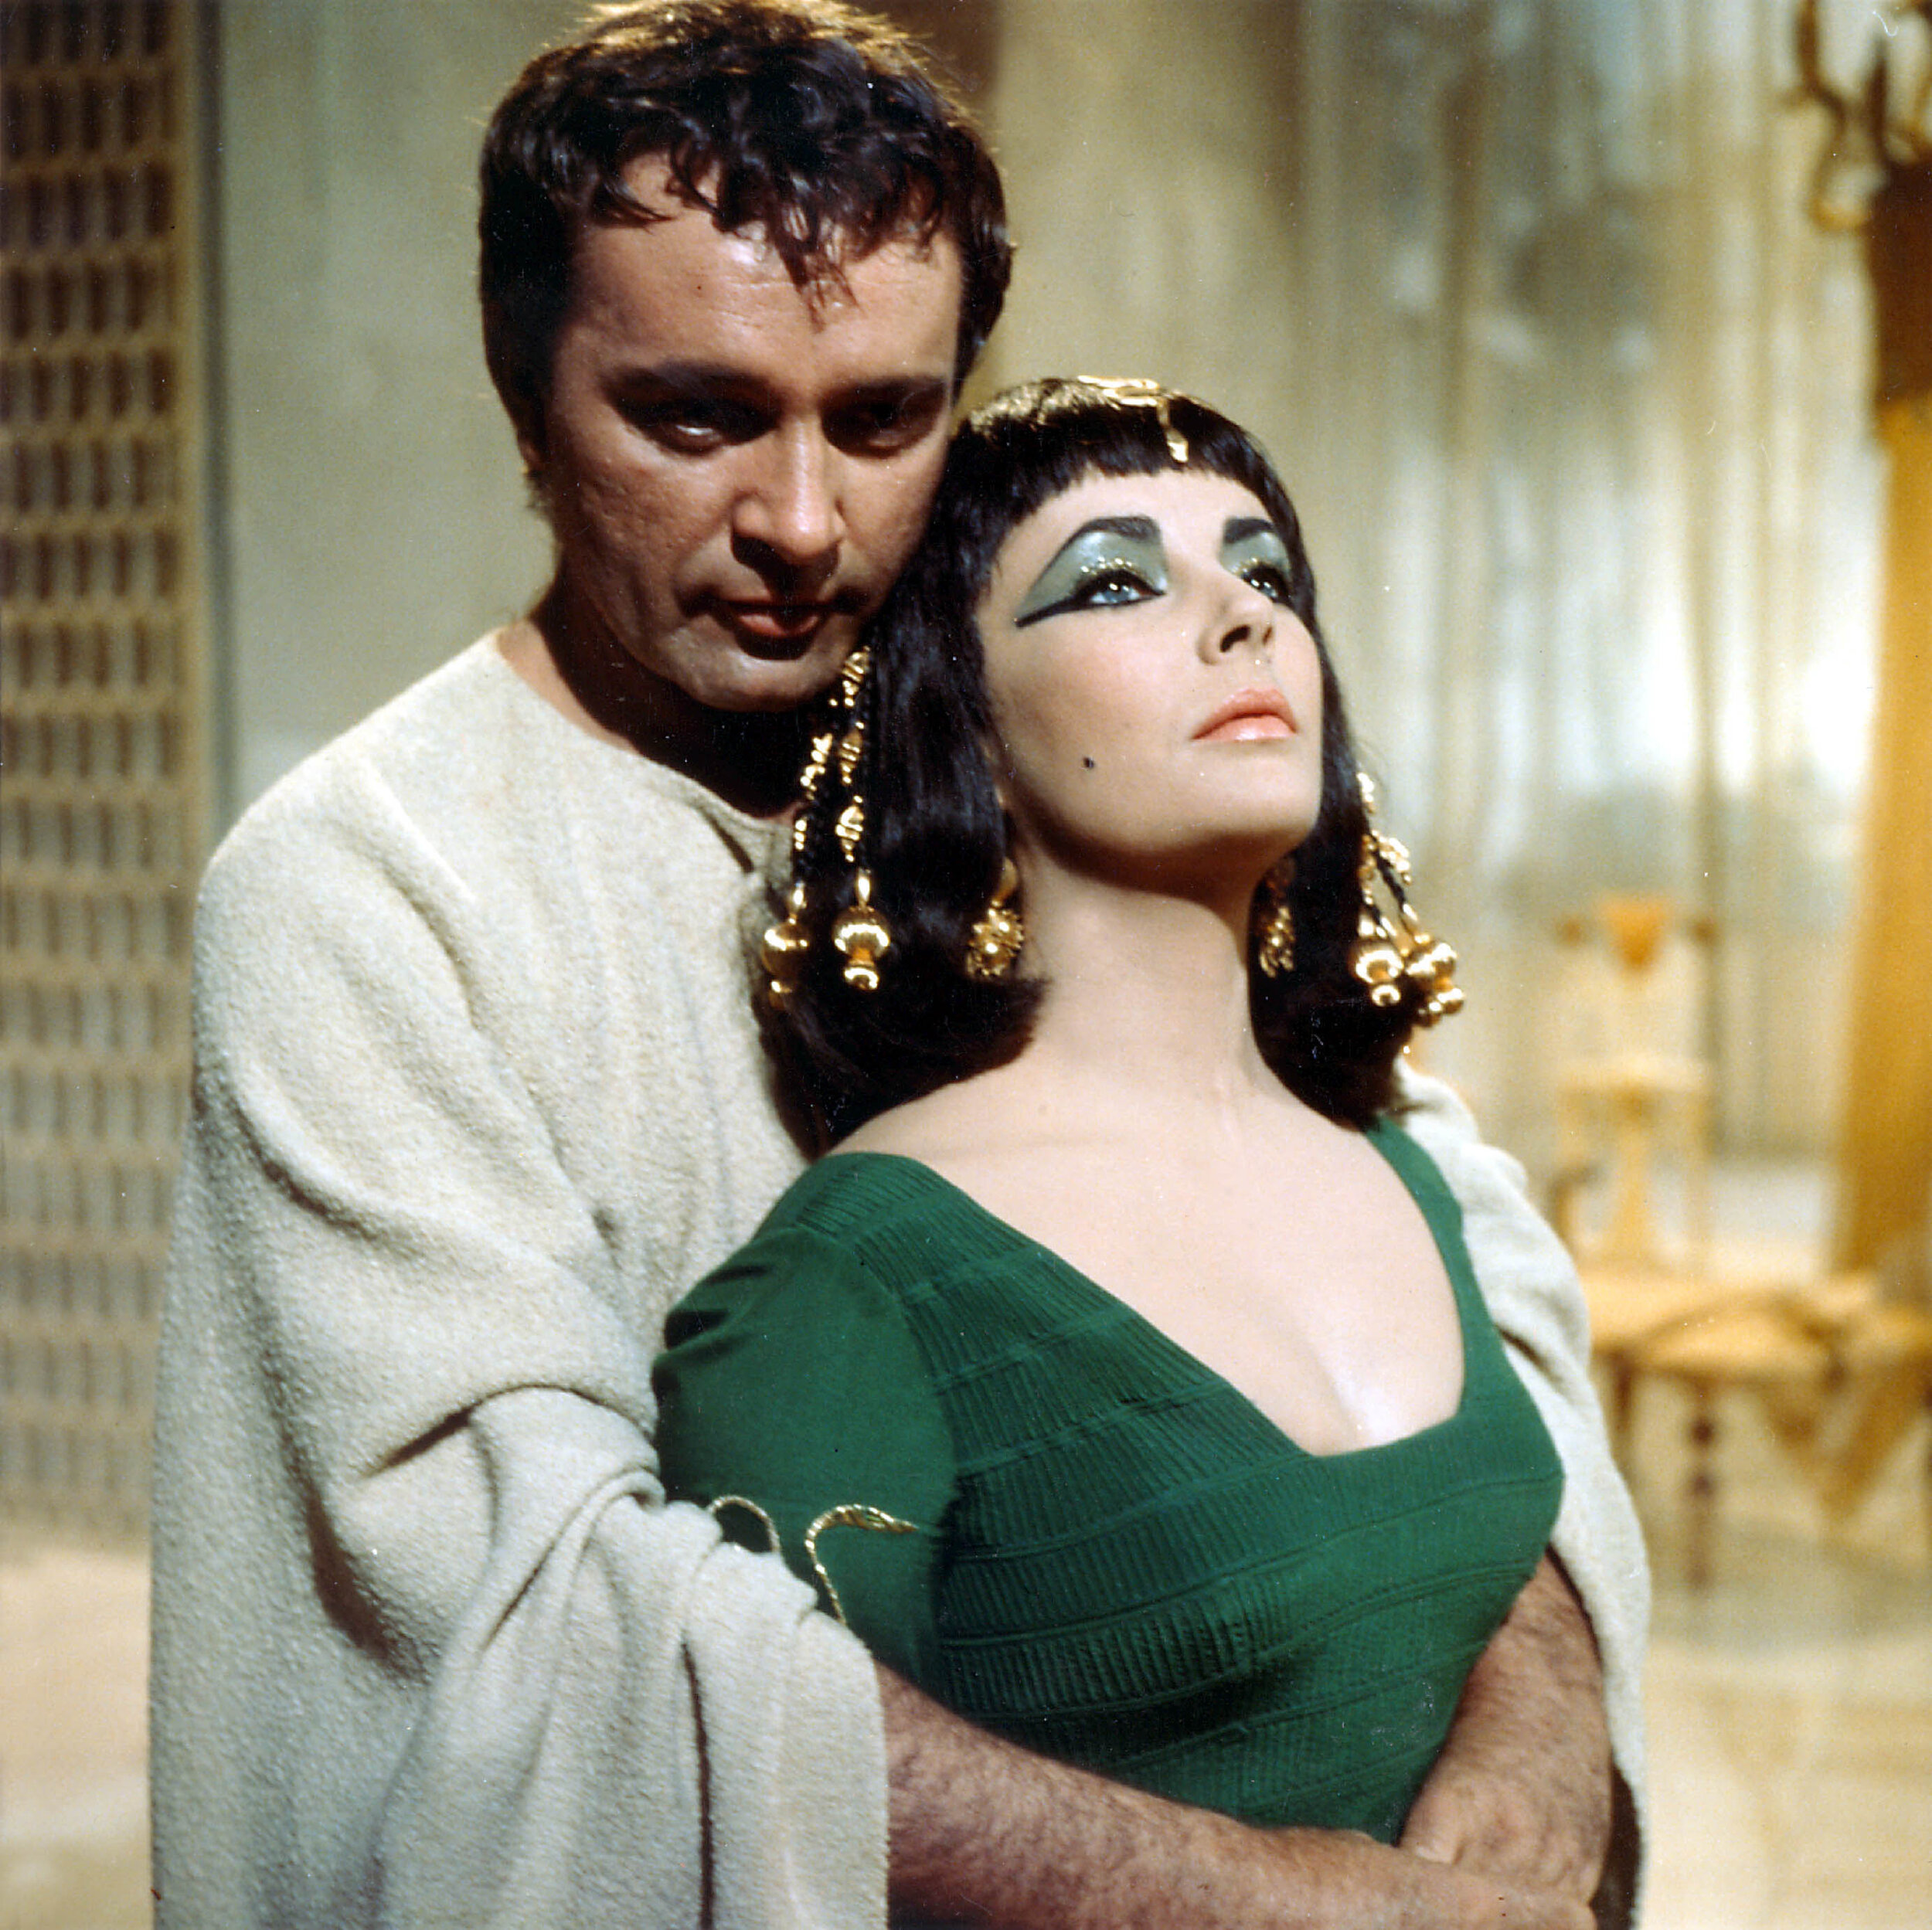 The Truth About Cleopatra's Many Husbands